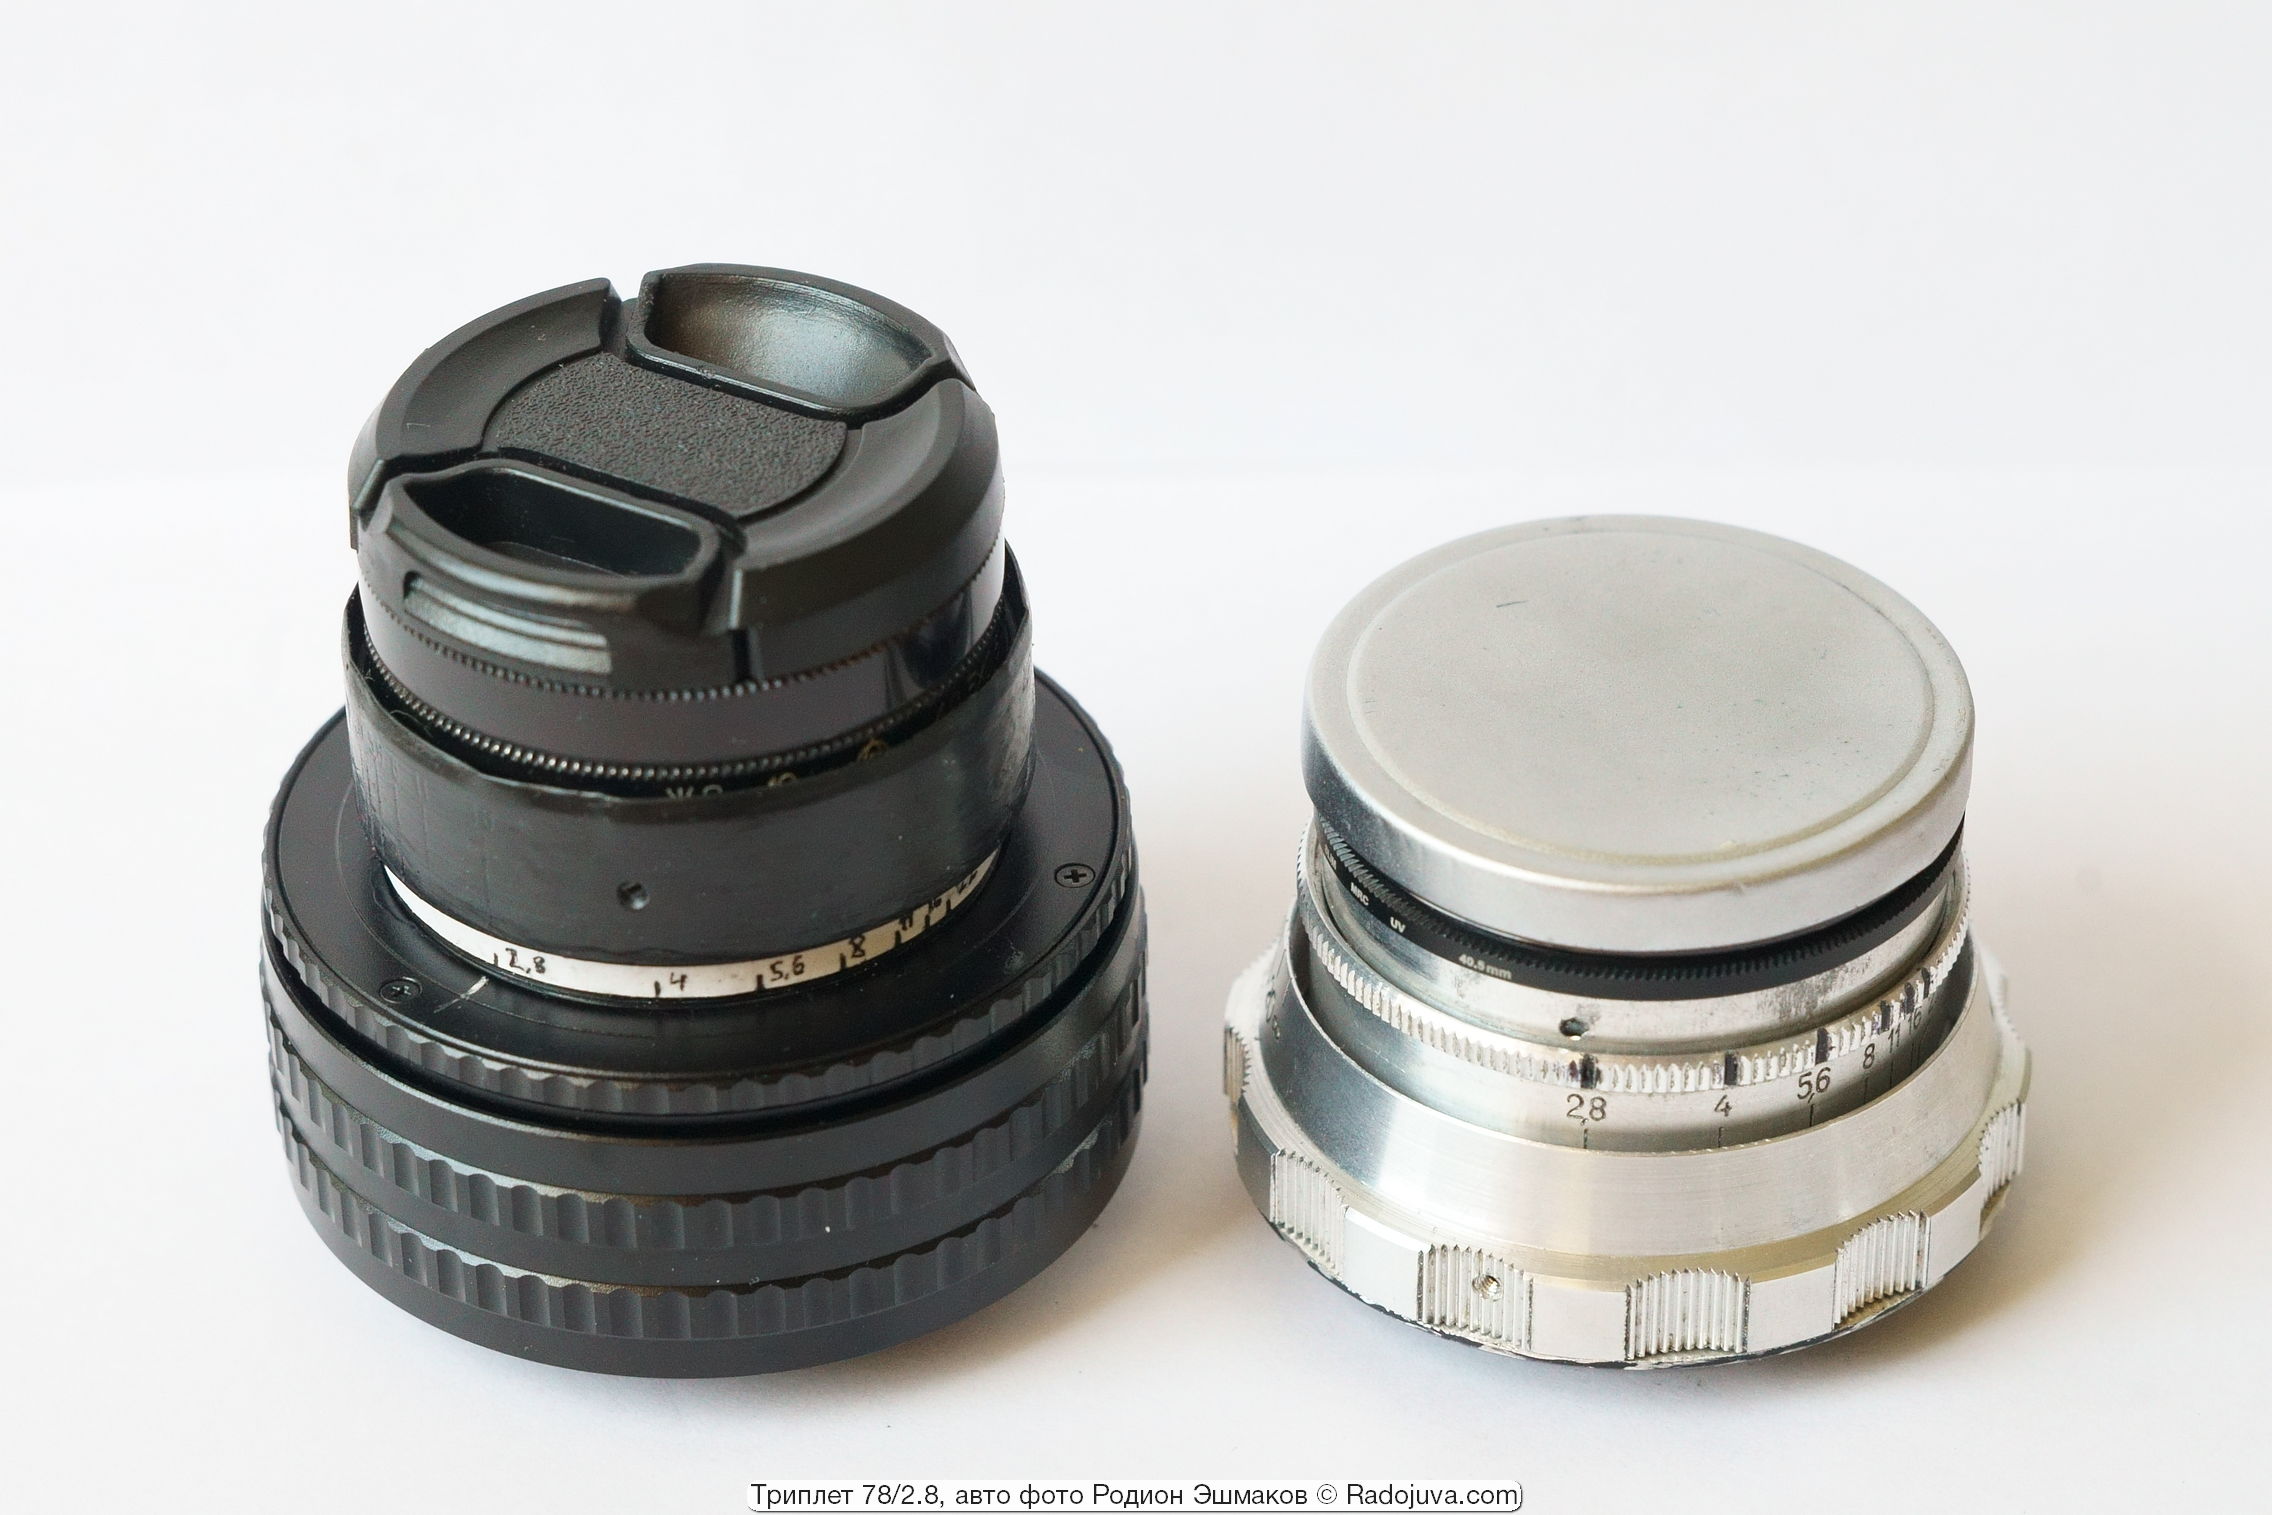 Two small cookies: Triplet 78 / 2.8 in a new type of performance and Industar-26m